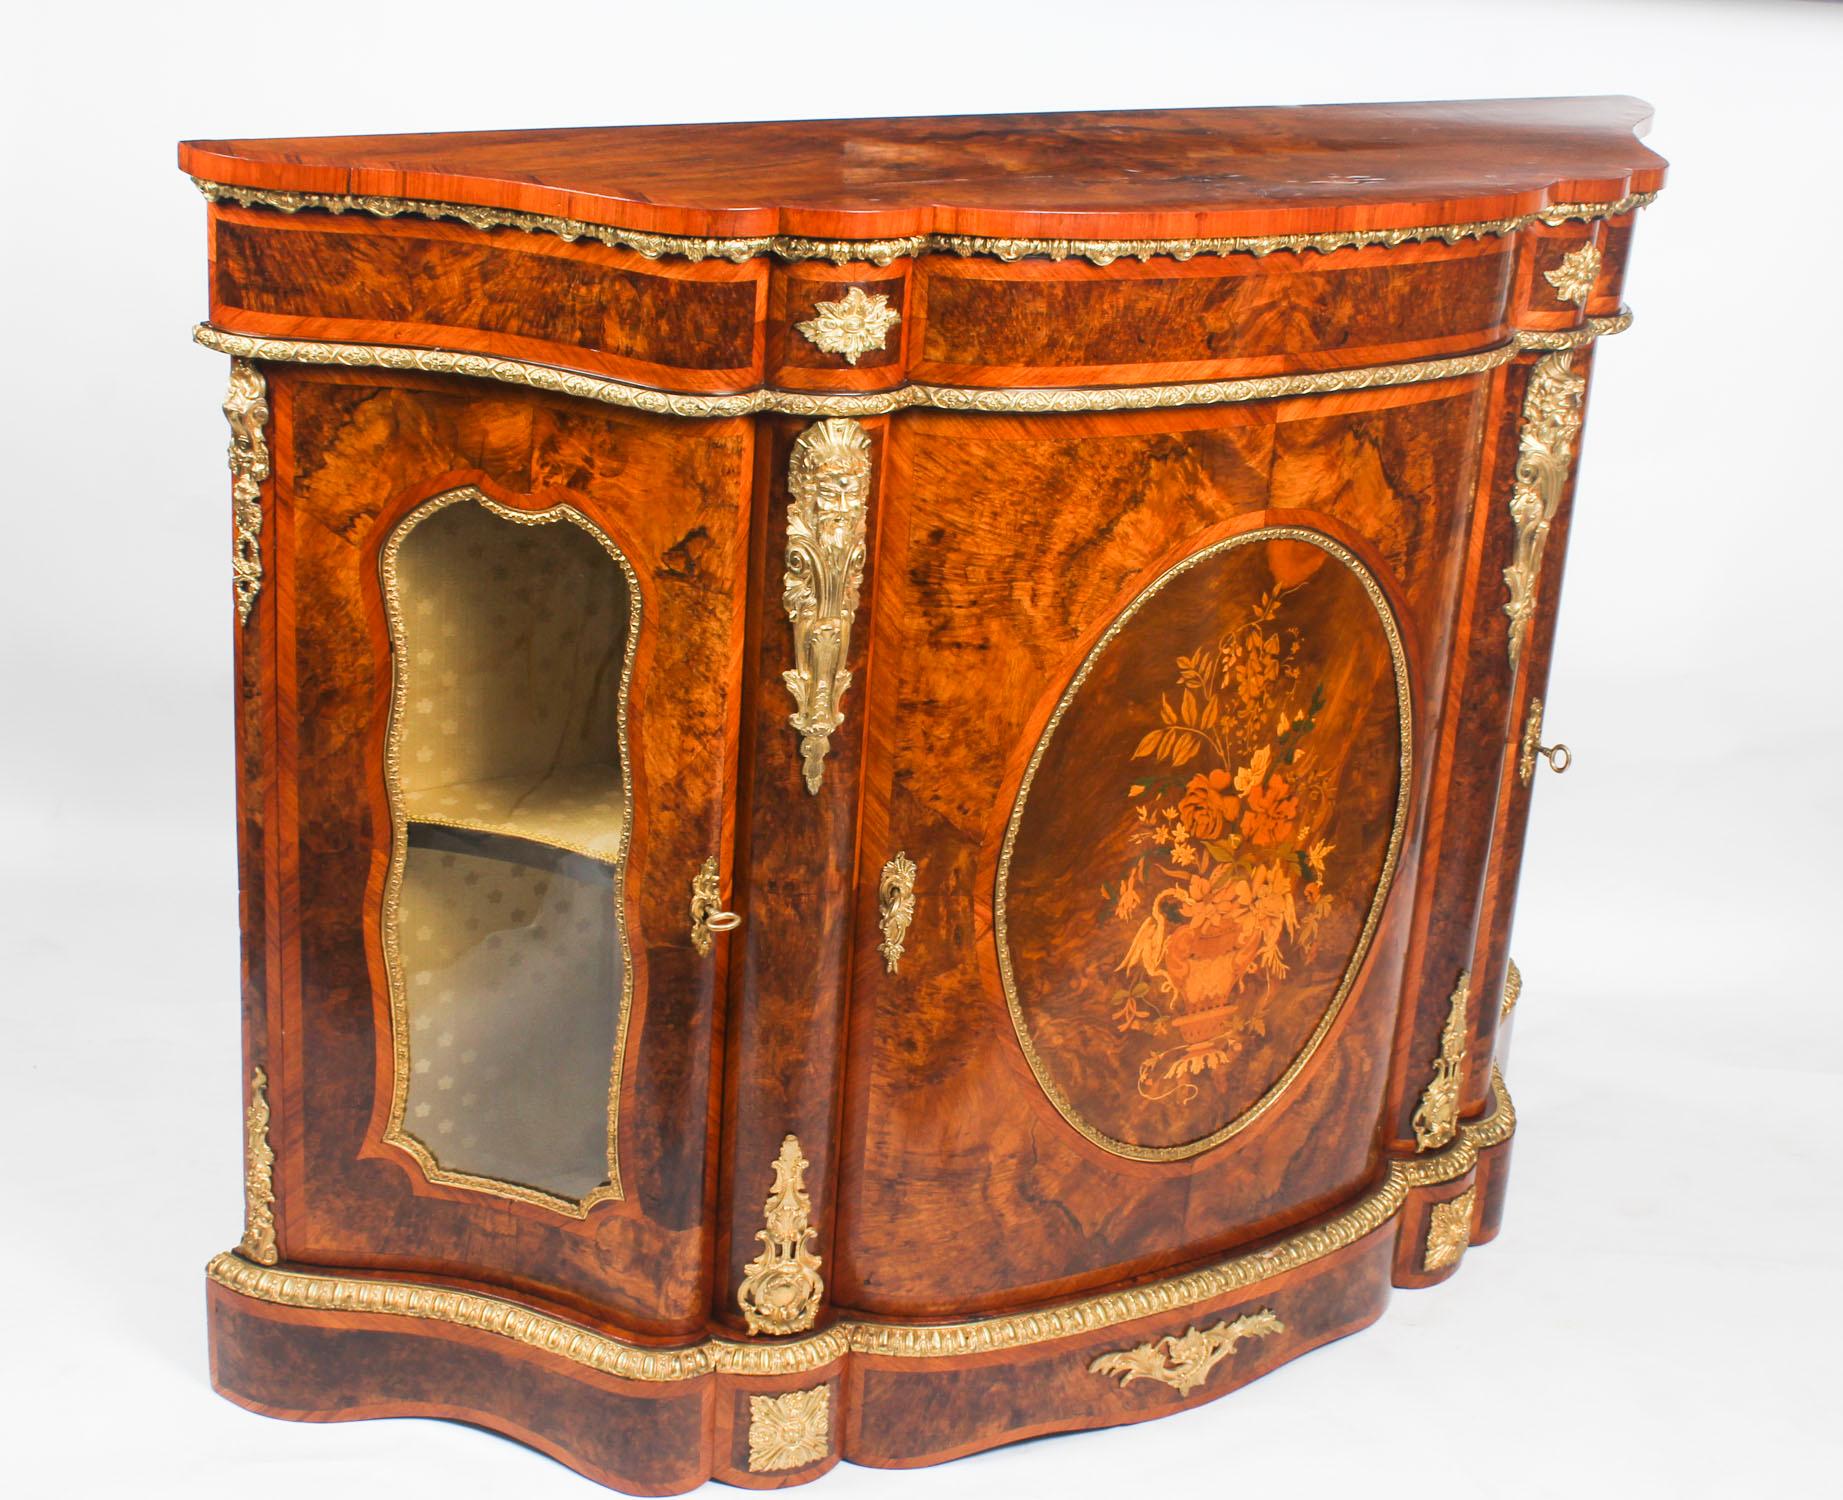 This is an exceptional quality antique Victorian ormolu mounted burr walnut and floral marquetry inlaid credenza, circa 1860.

Oozing sophistication and charm, this credenza is the absolute epitome of Victorian high society.

The entire piece